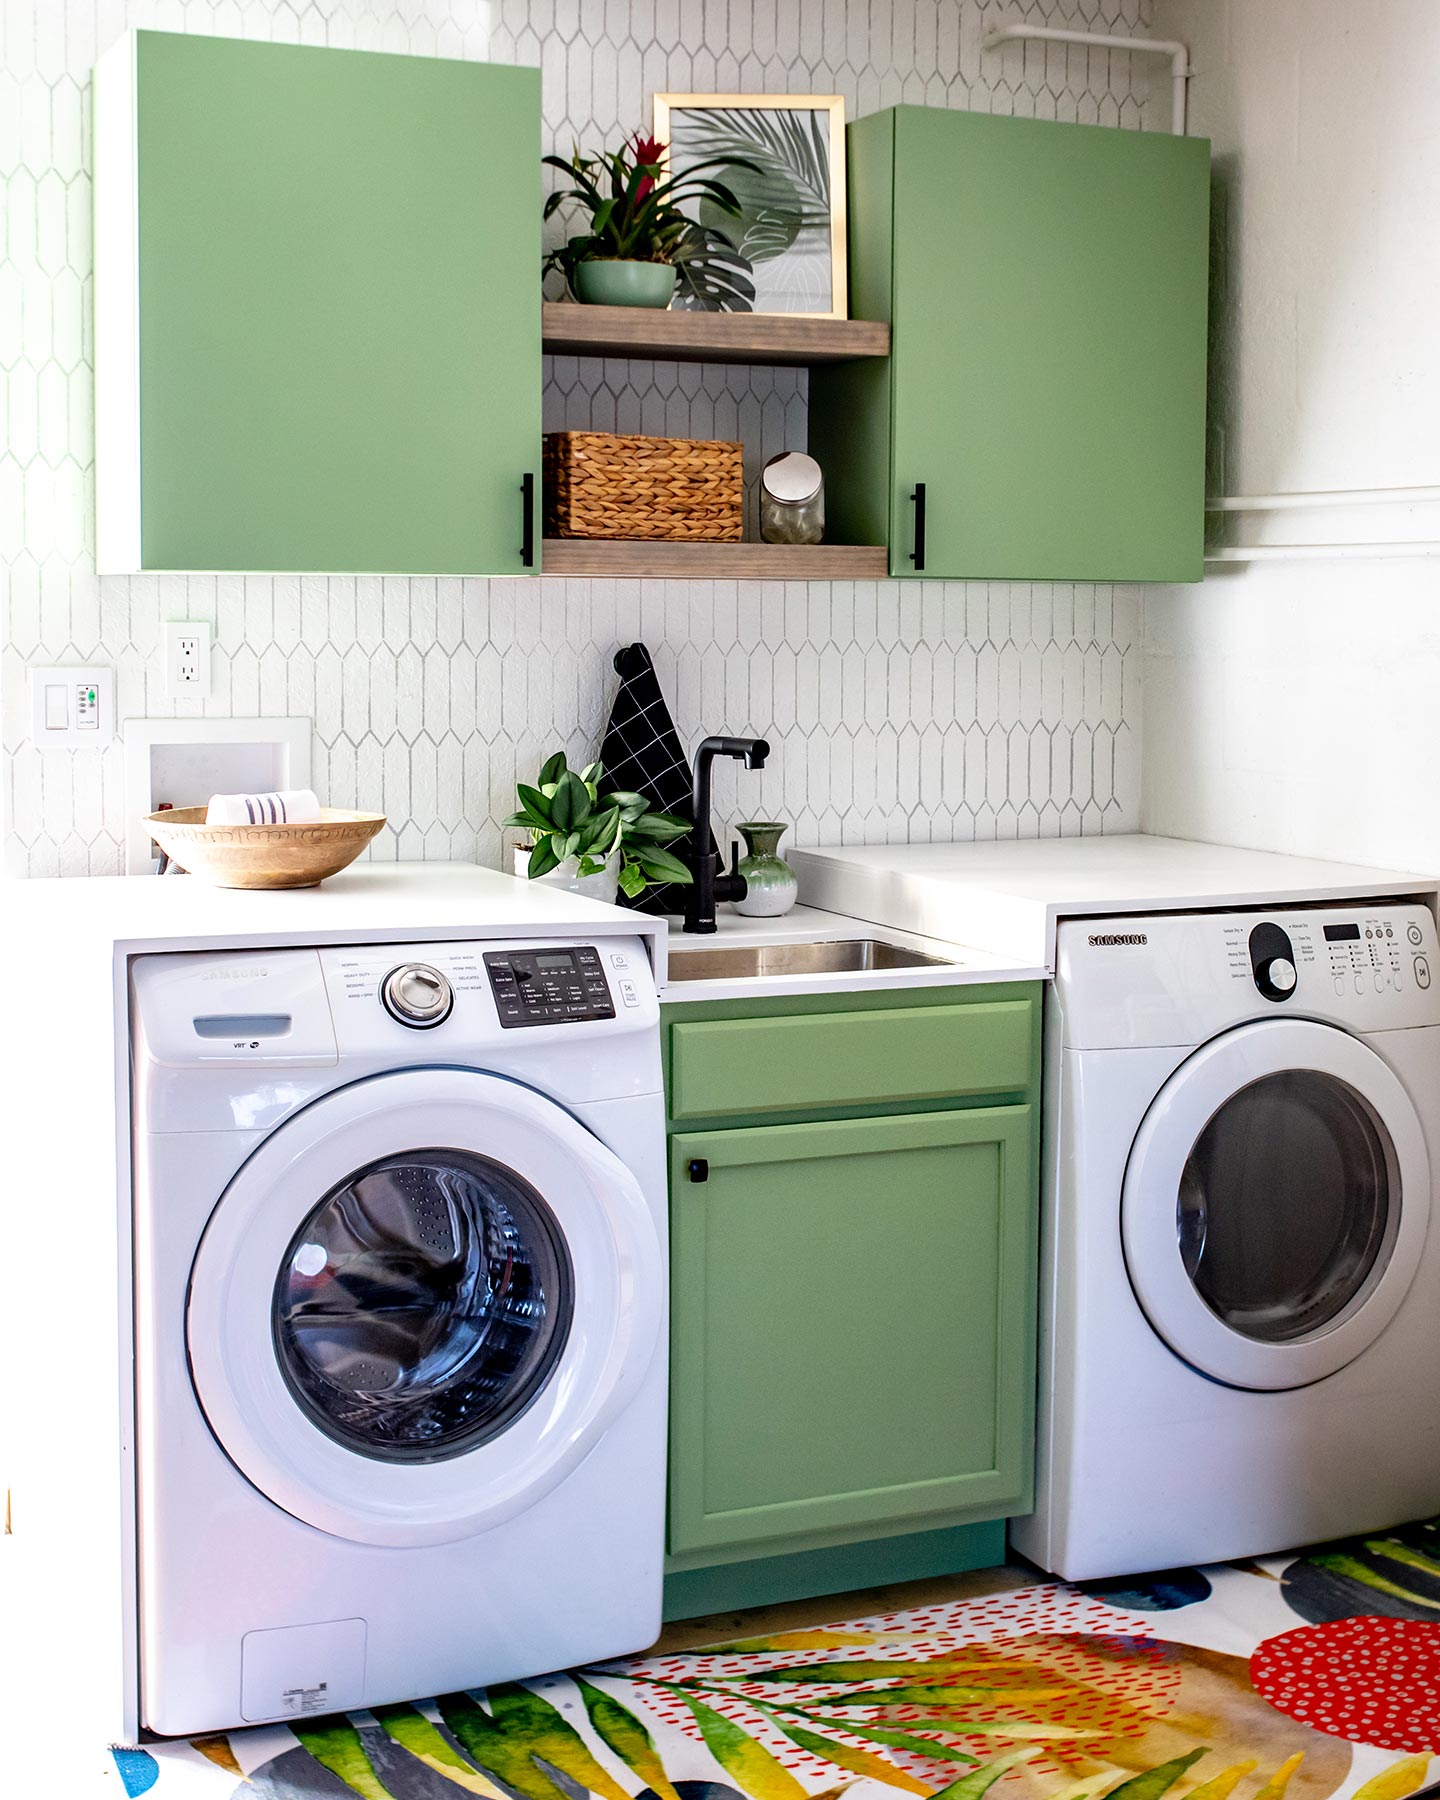 Discover the perfect shades of Green Paint from Clare, like this energetic hue called Avocado Toast.